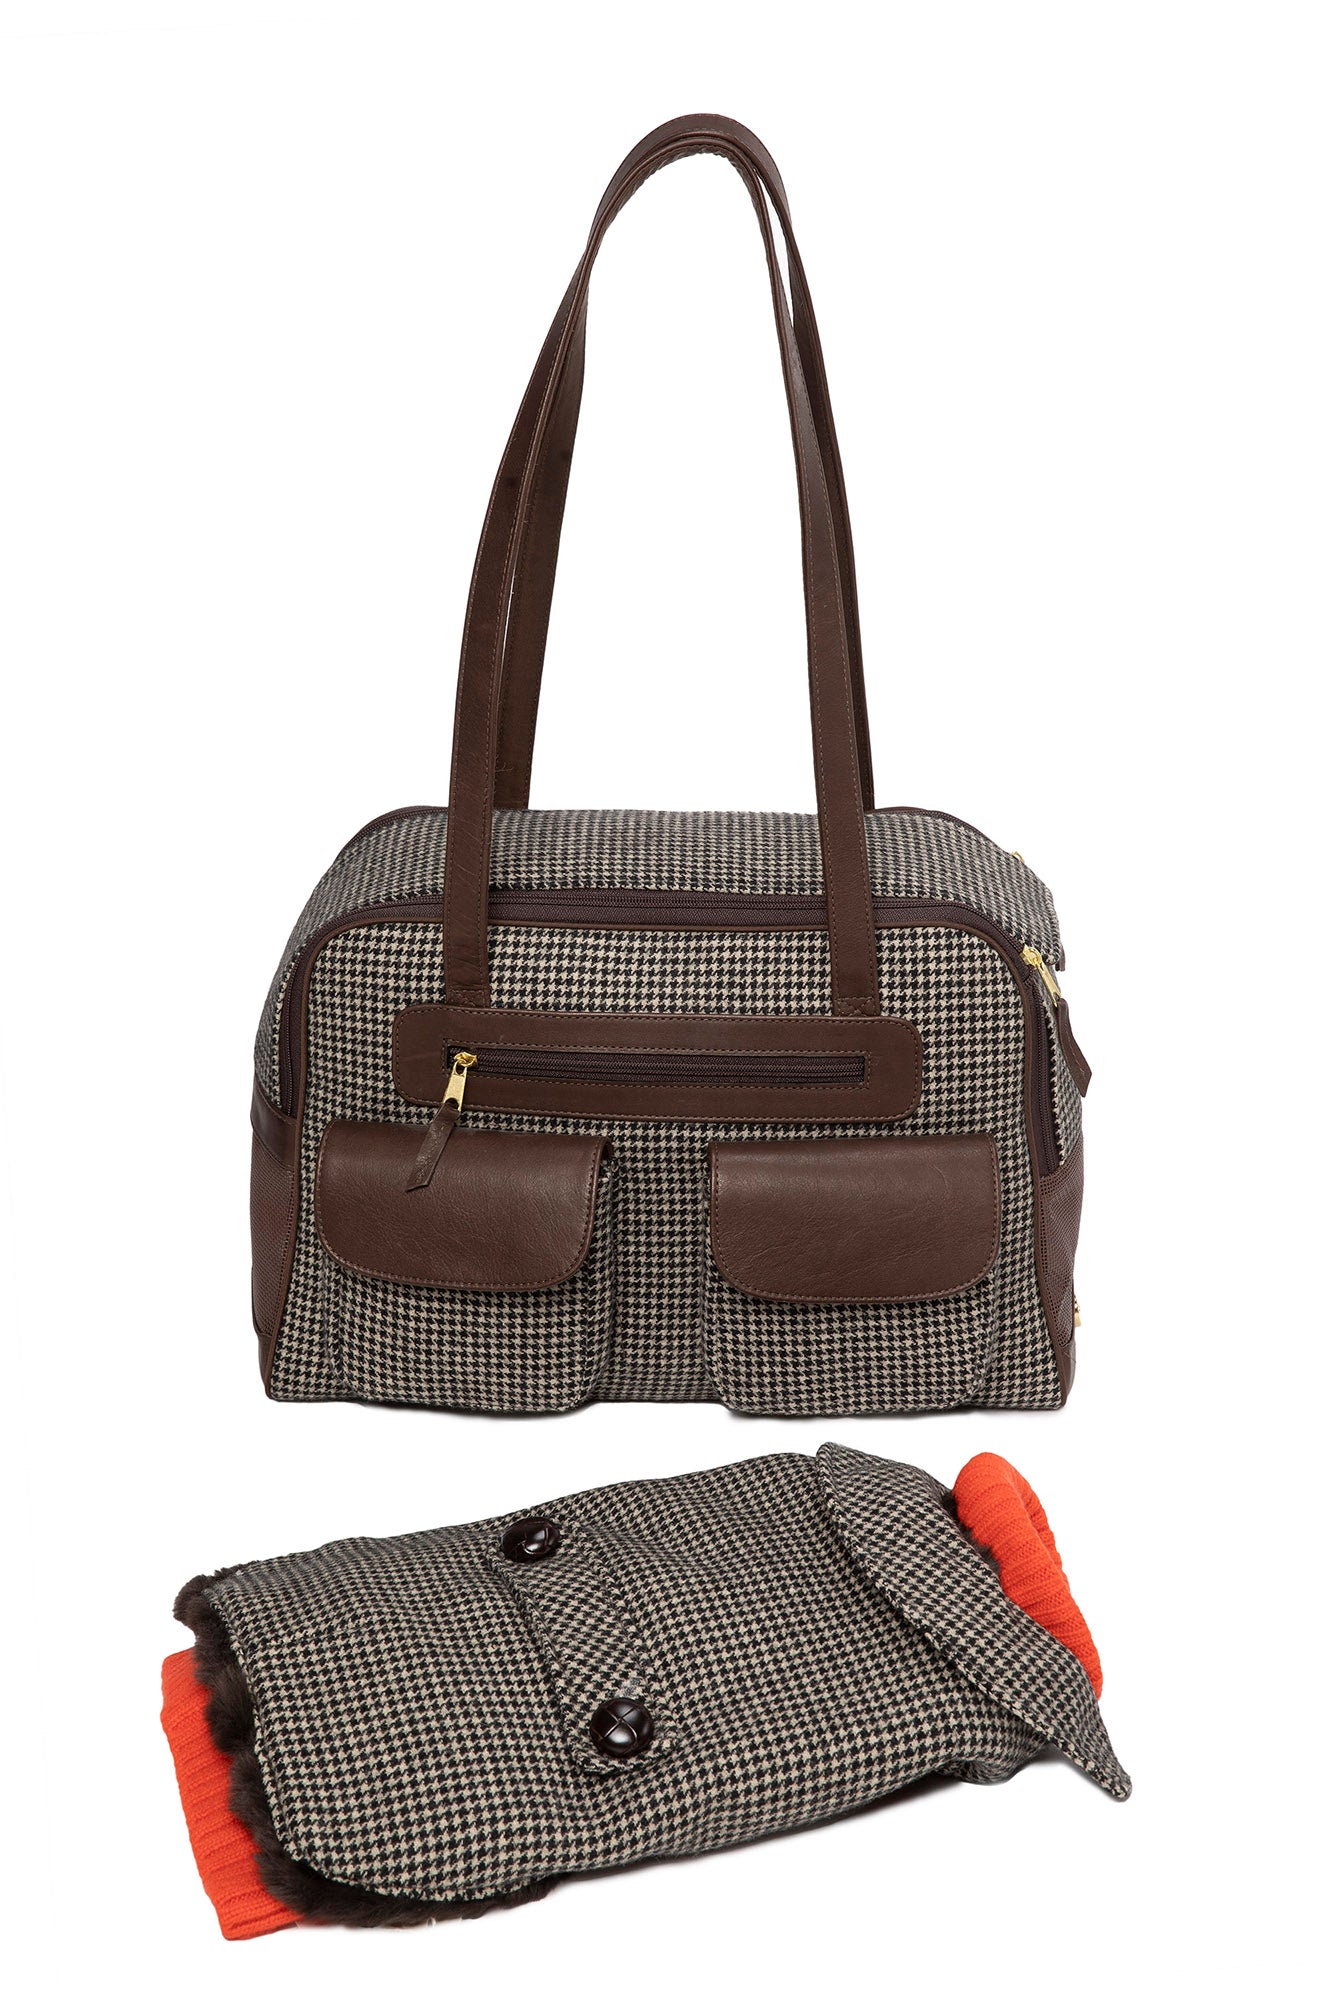 Dog Carrier - Winter - Cashmere Brown Checked Houndstooth Carrier